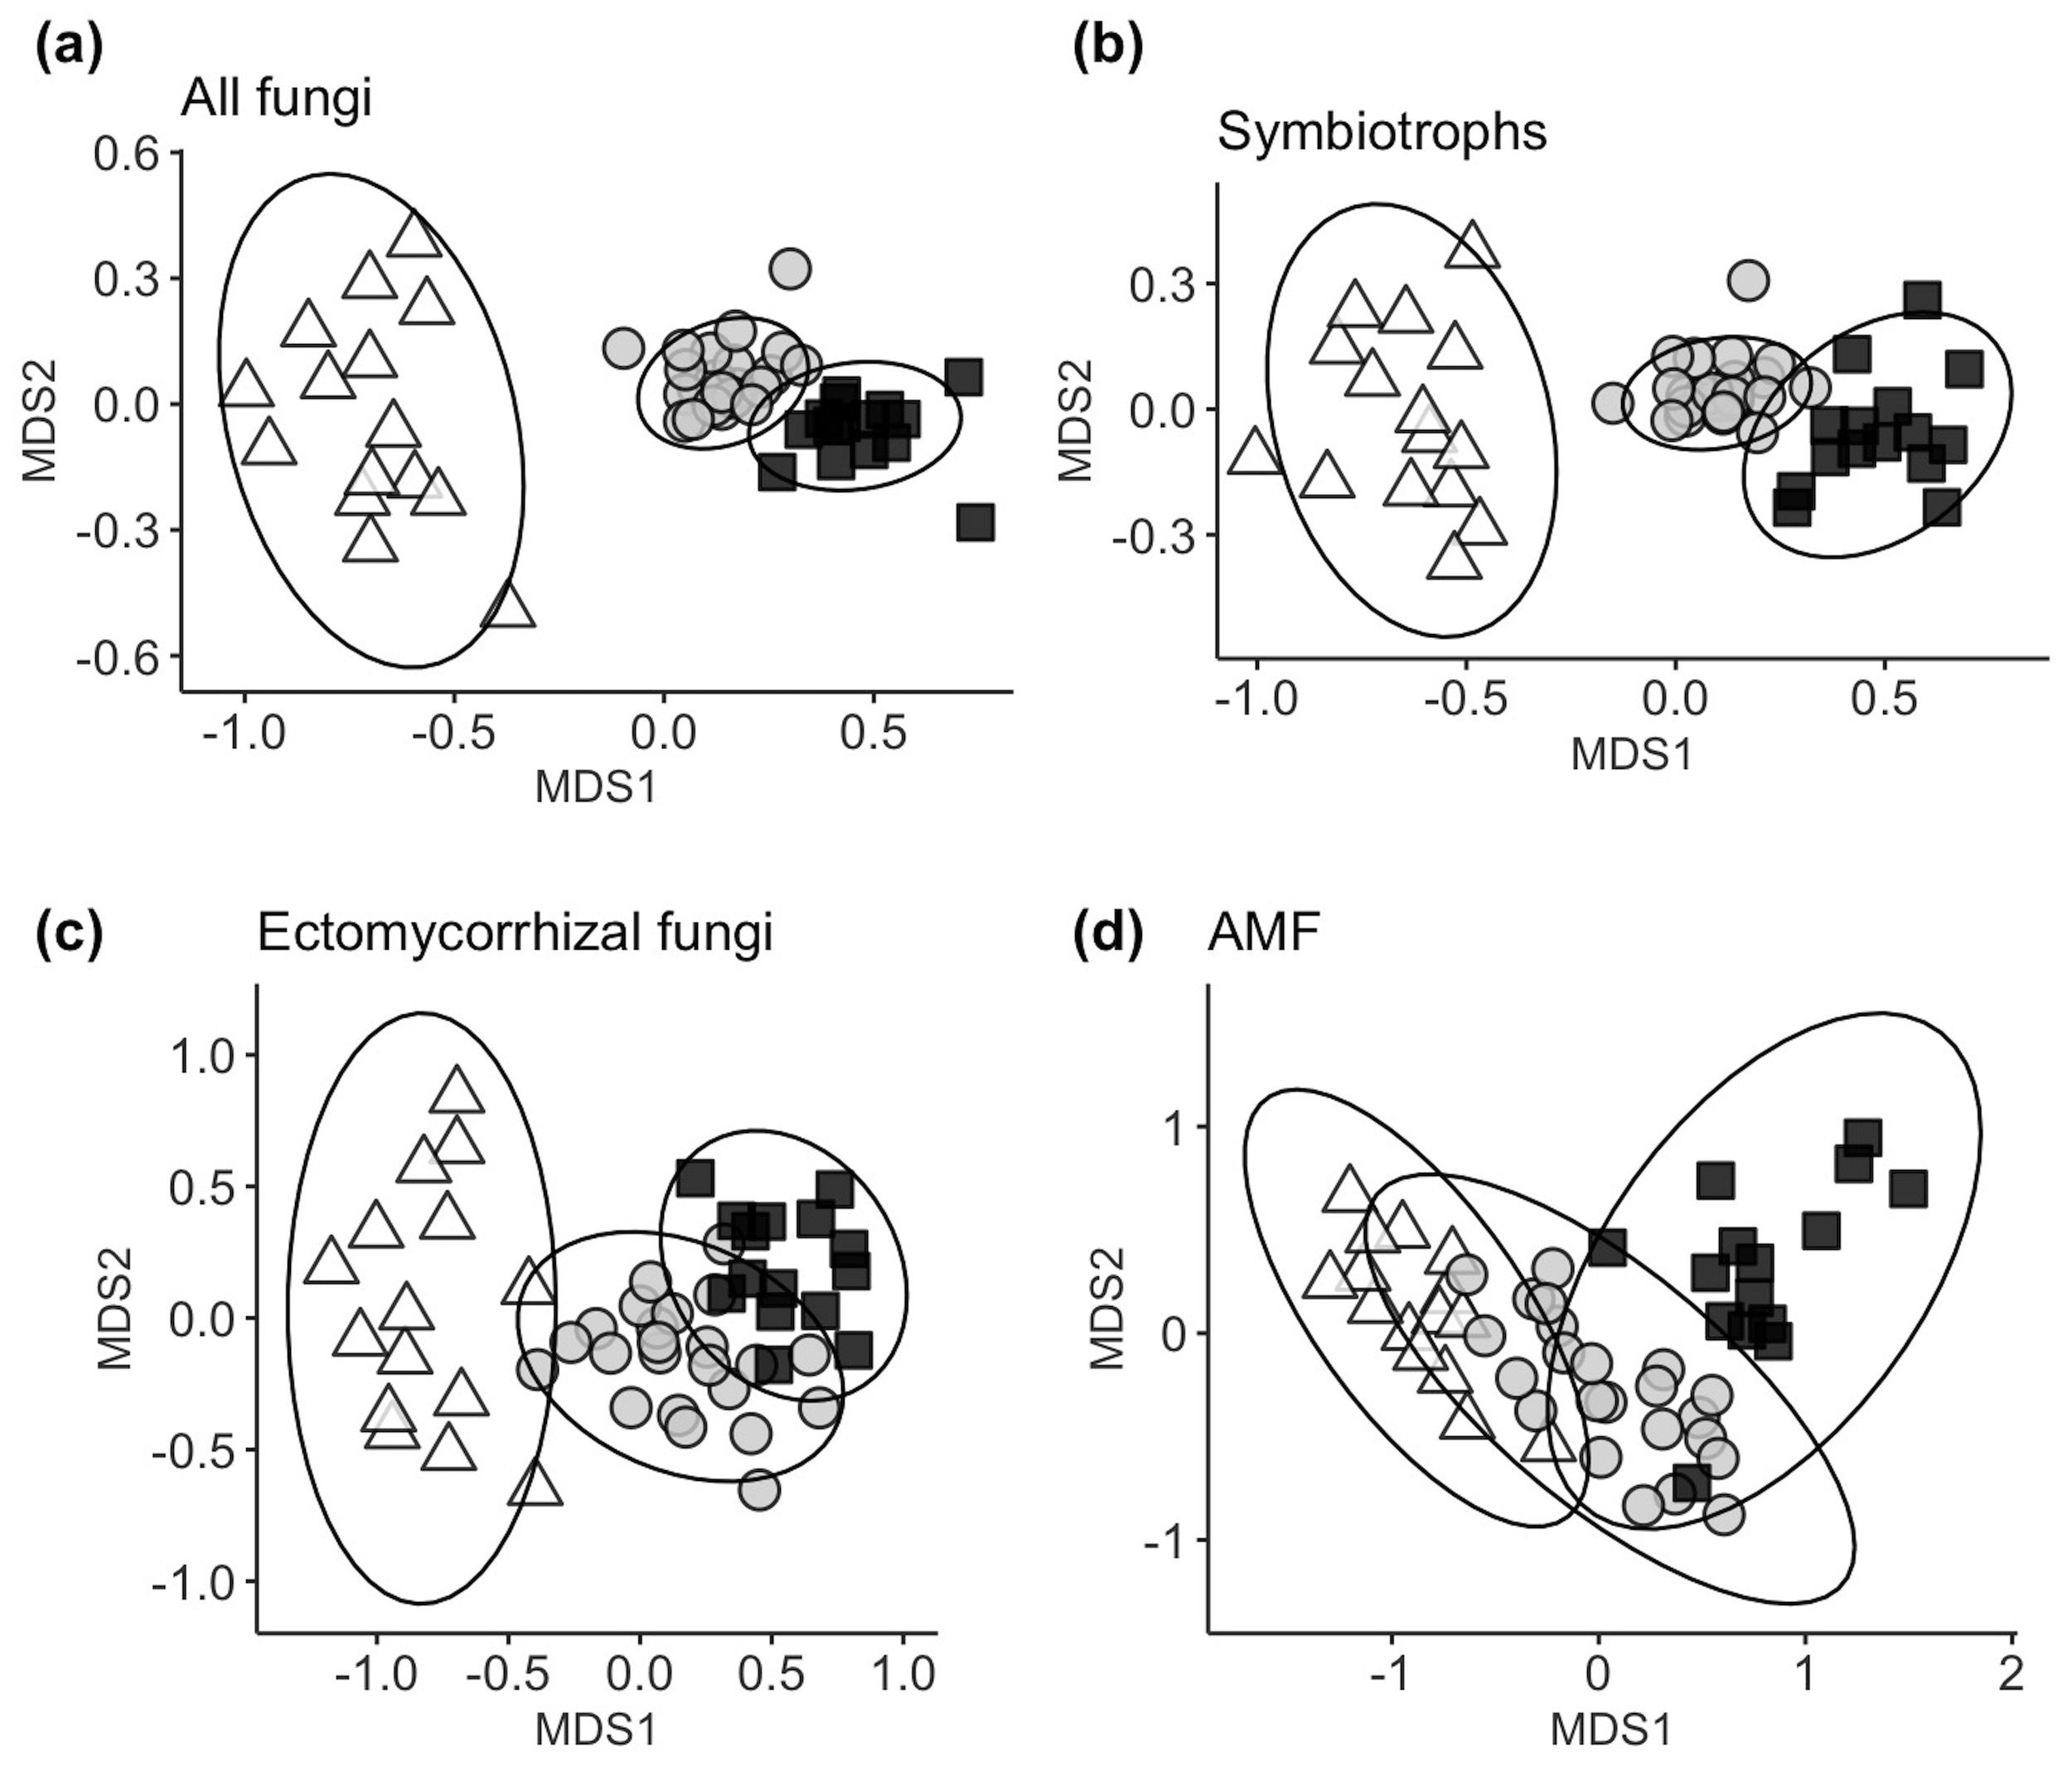 NMDS plot of soil fungal communities subset by degree of host association. White triangles represent arid sites, grey circles represent intermediate sites, black squares represent mesic sites.